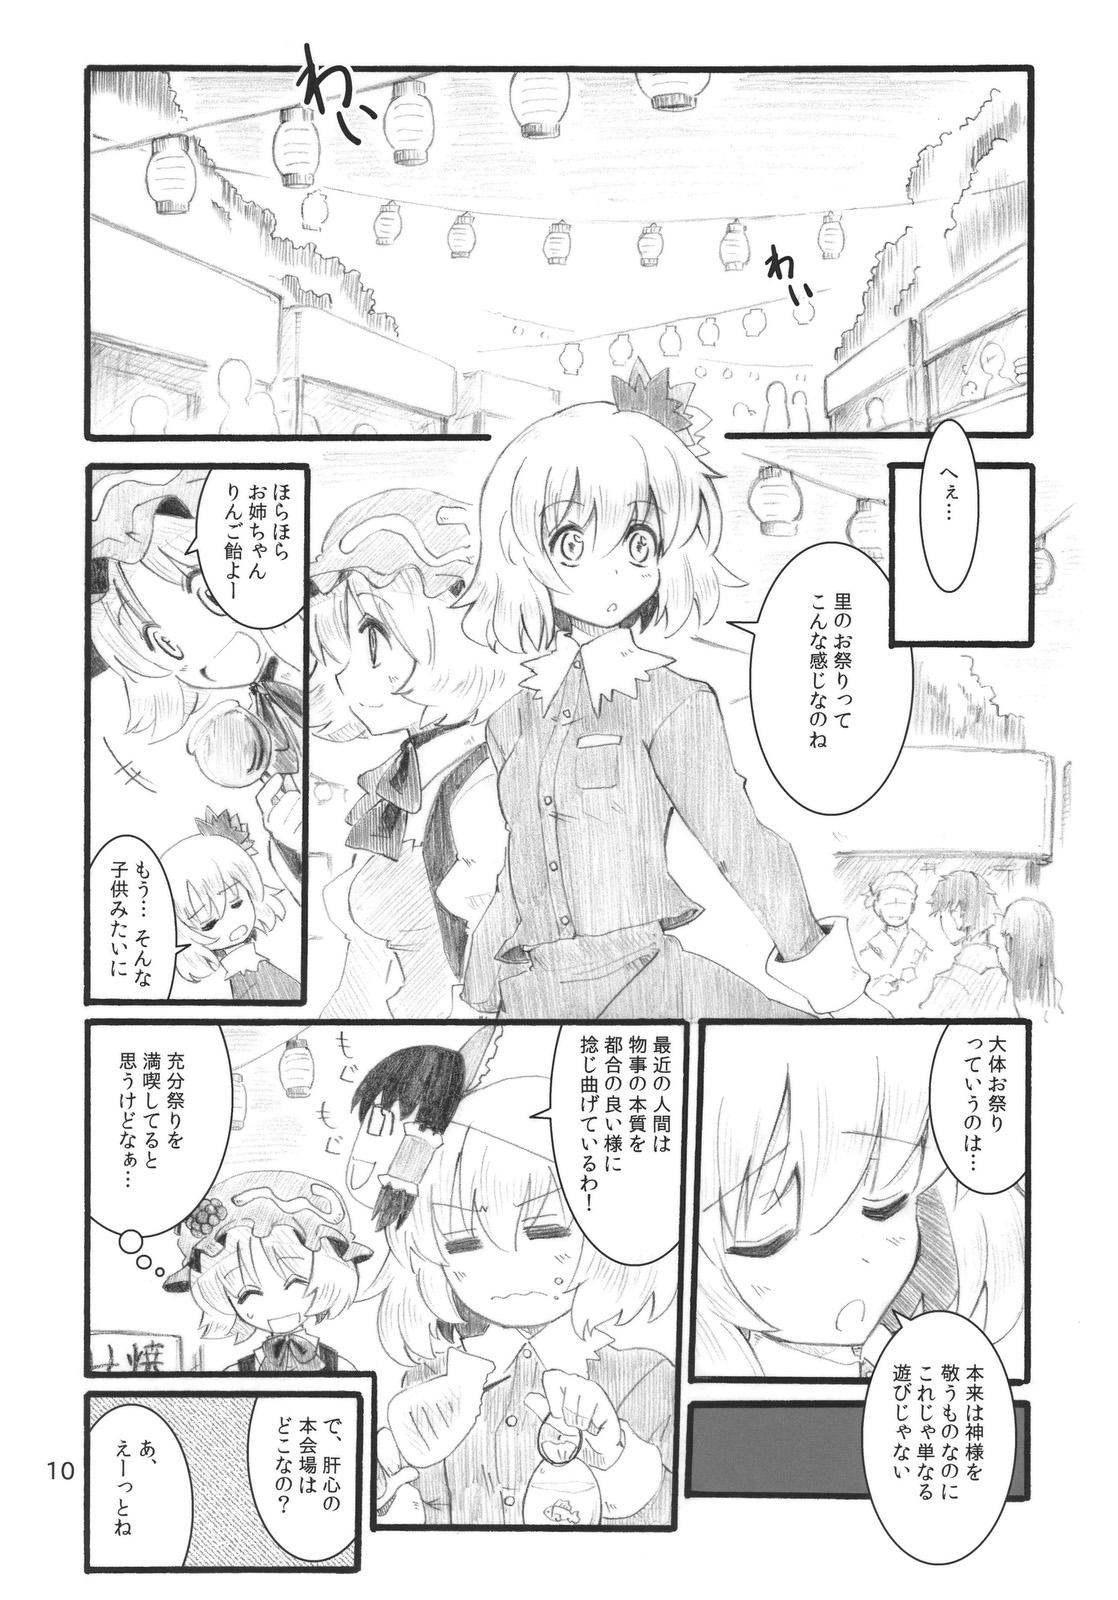 Cruising Autumn Leaves - Touhou project Gay Clinic - Page 10